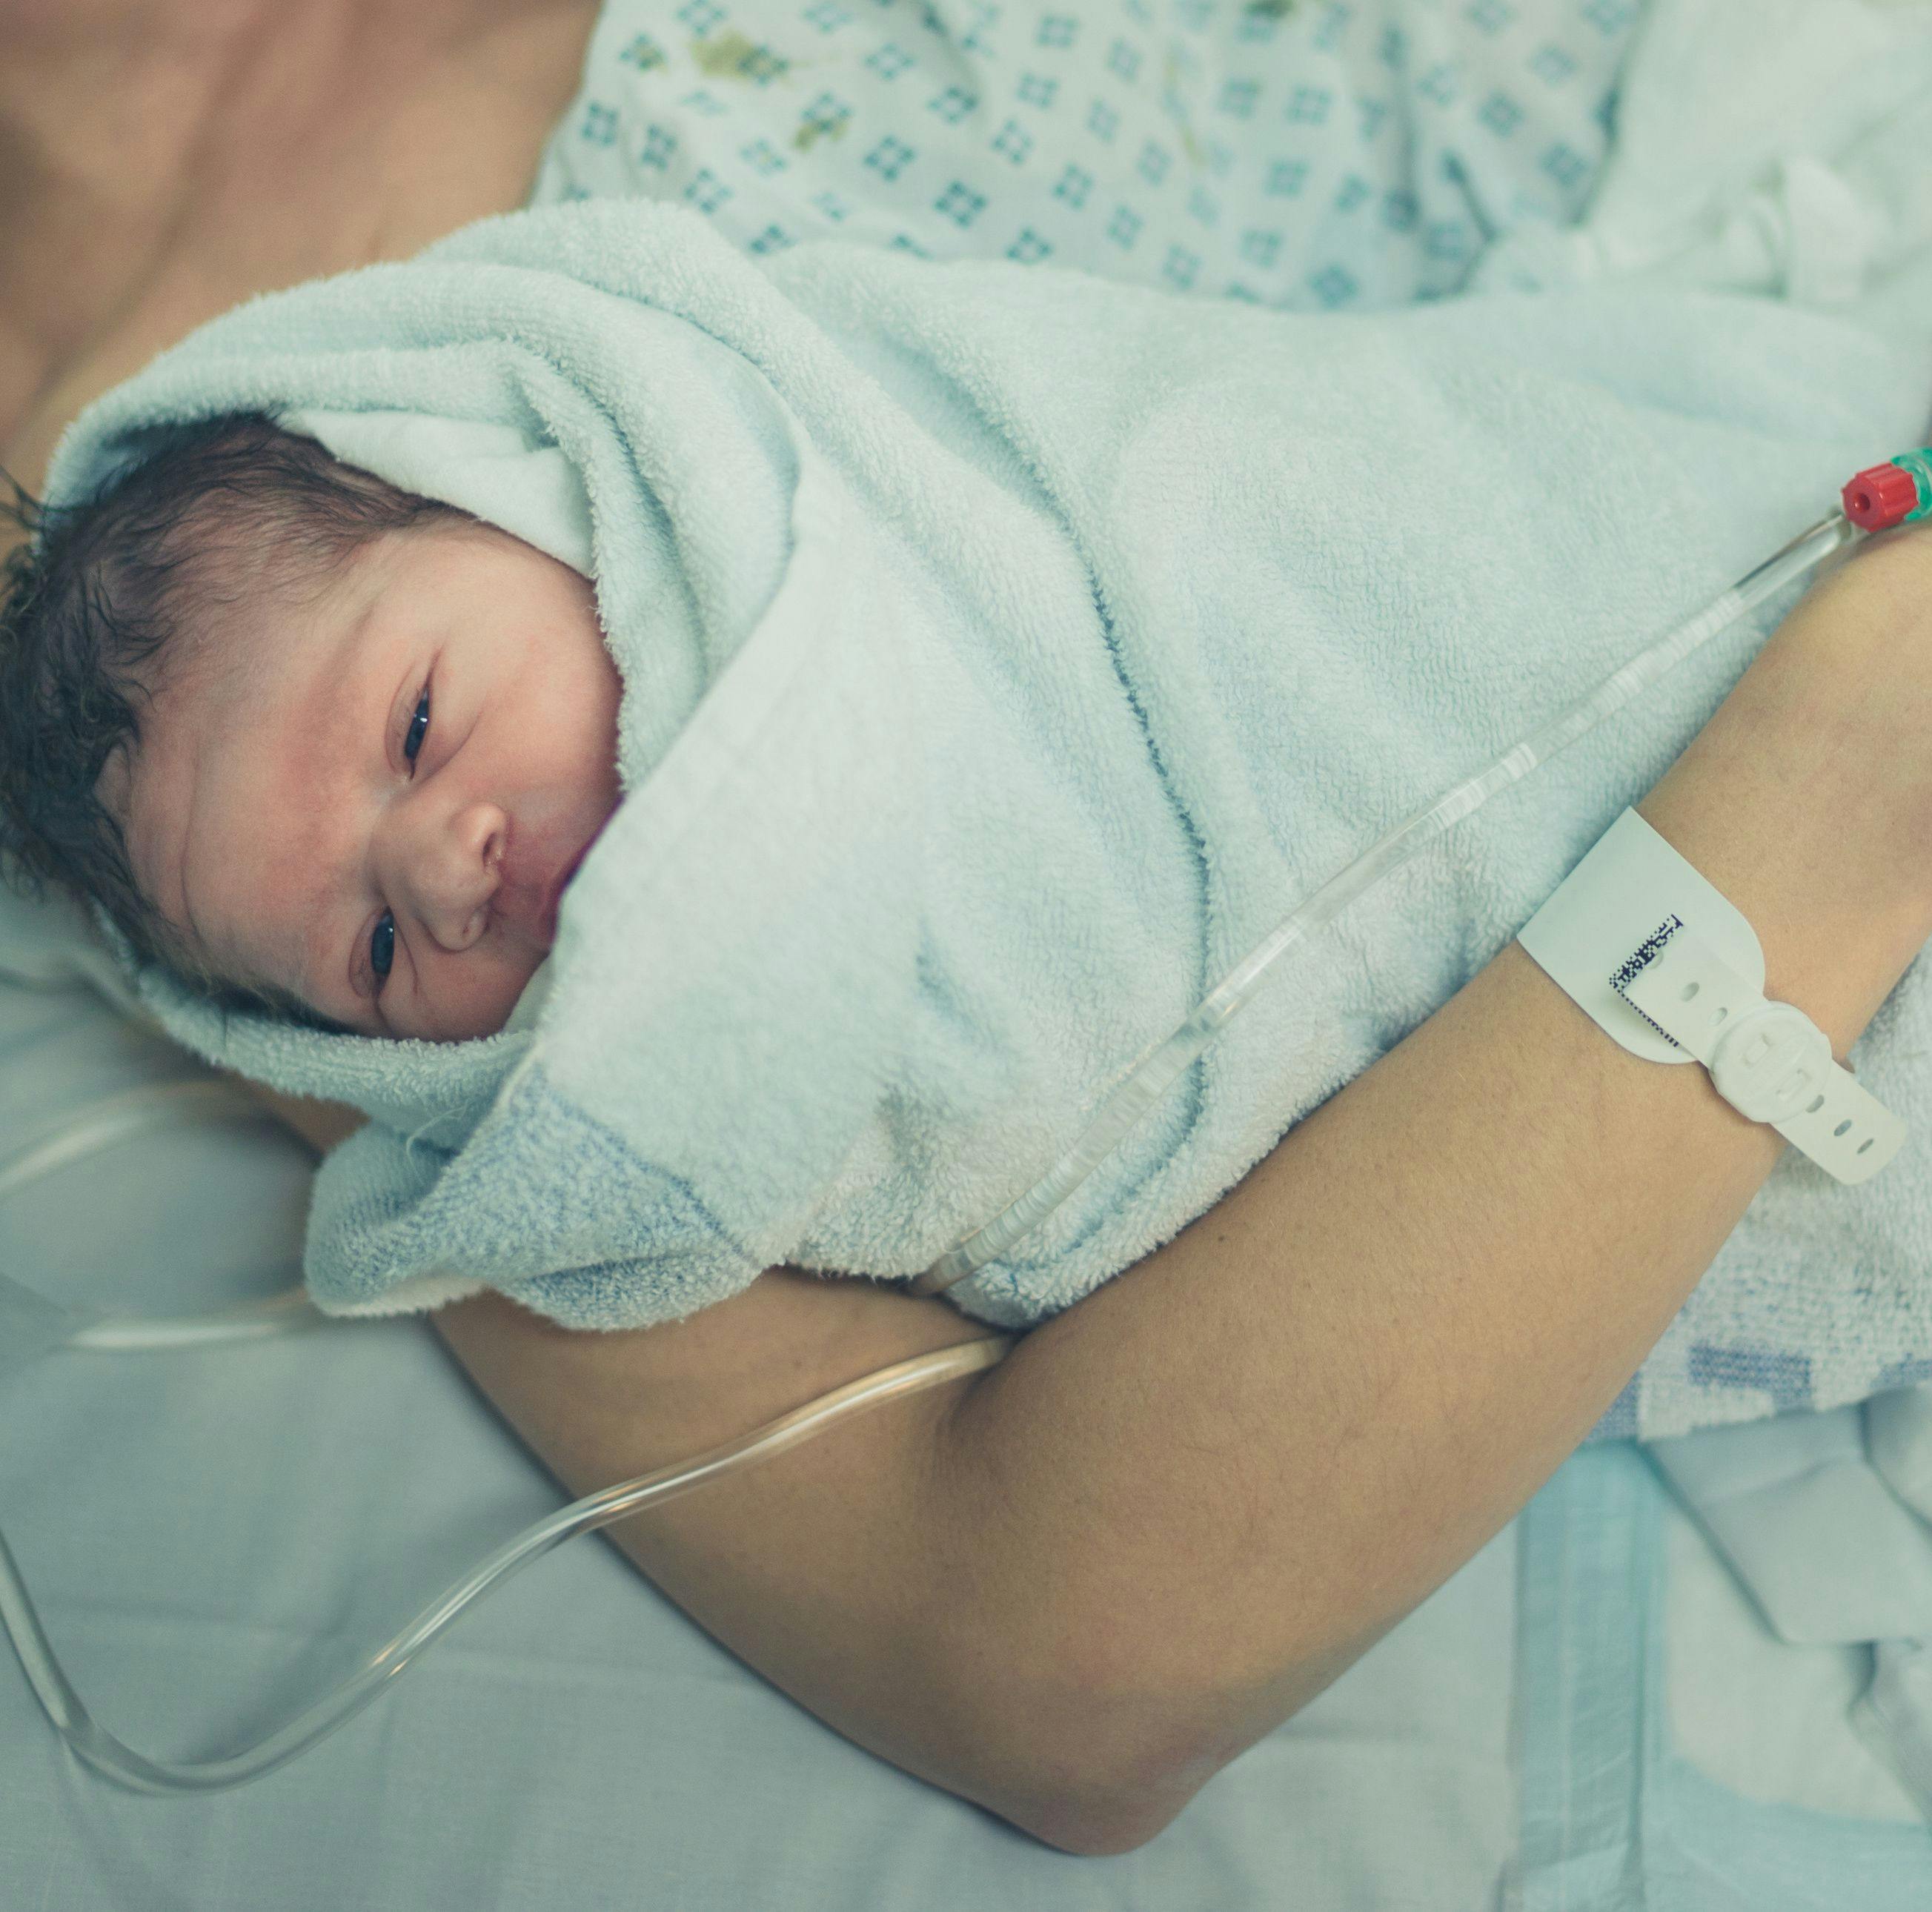 Midwives Implement Screening Practices for Postpartum Depression More Than Practitioners